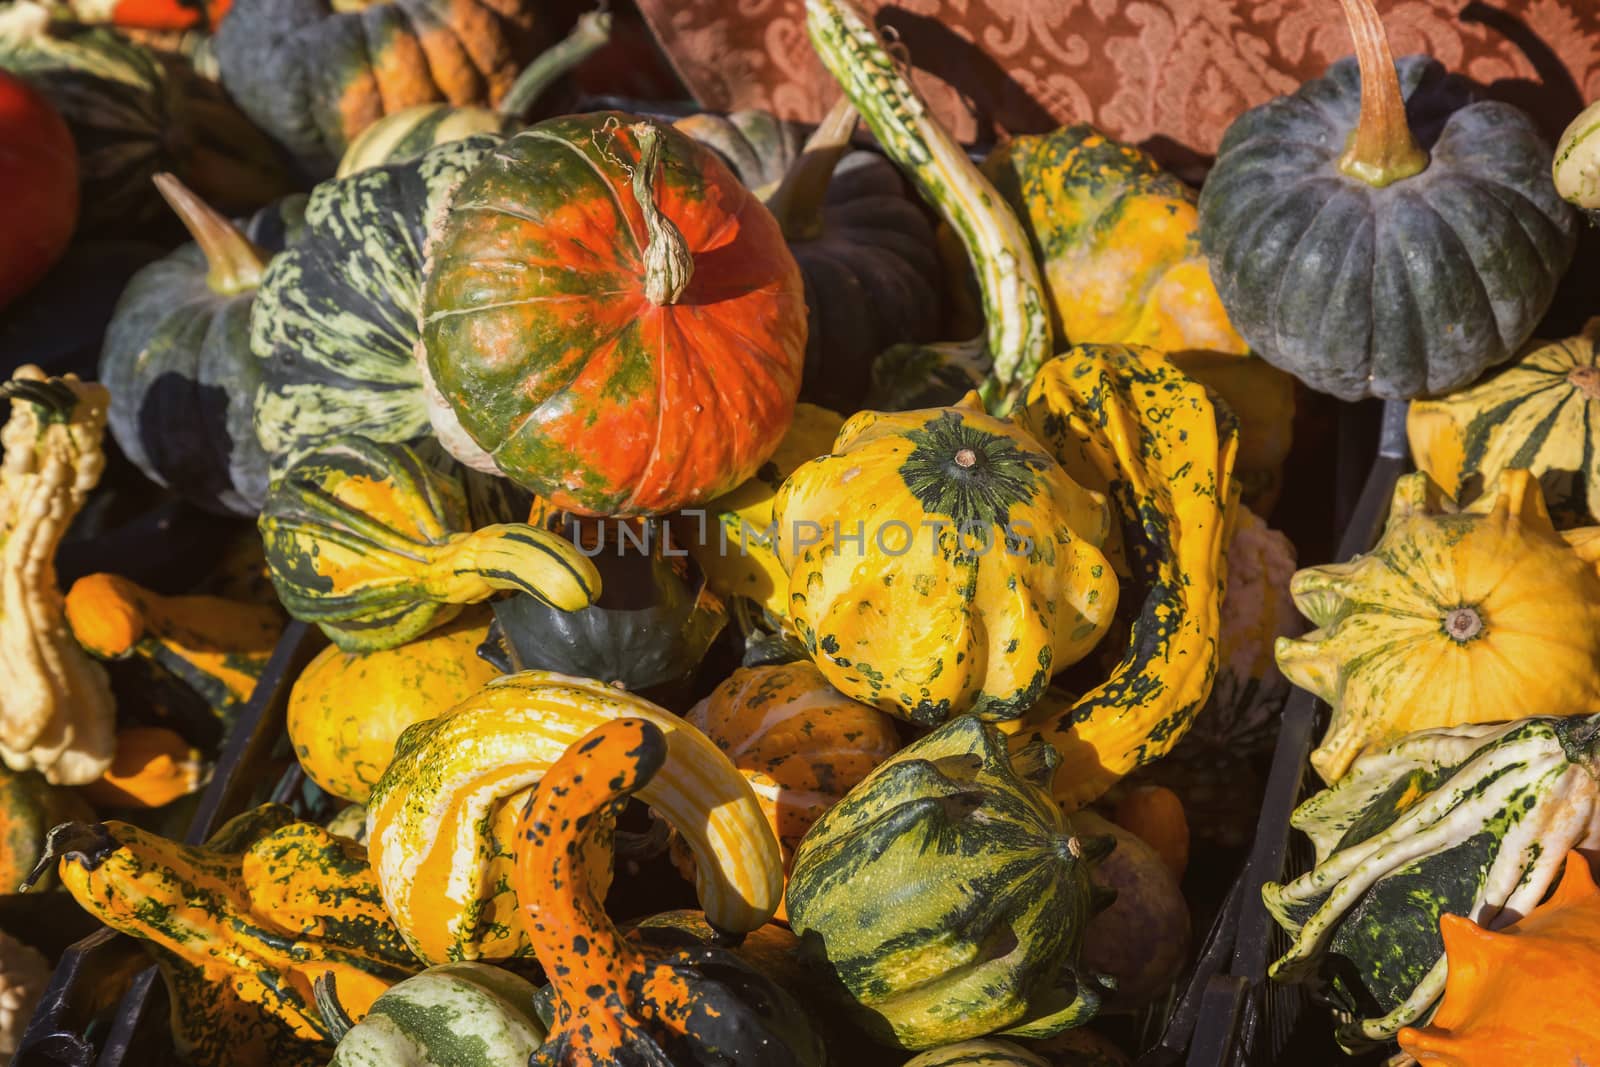  Different kinds of pumpkins in sunshine; Offer at weekly market by Digoarpi